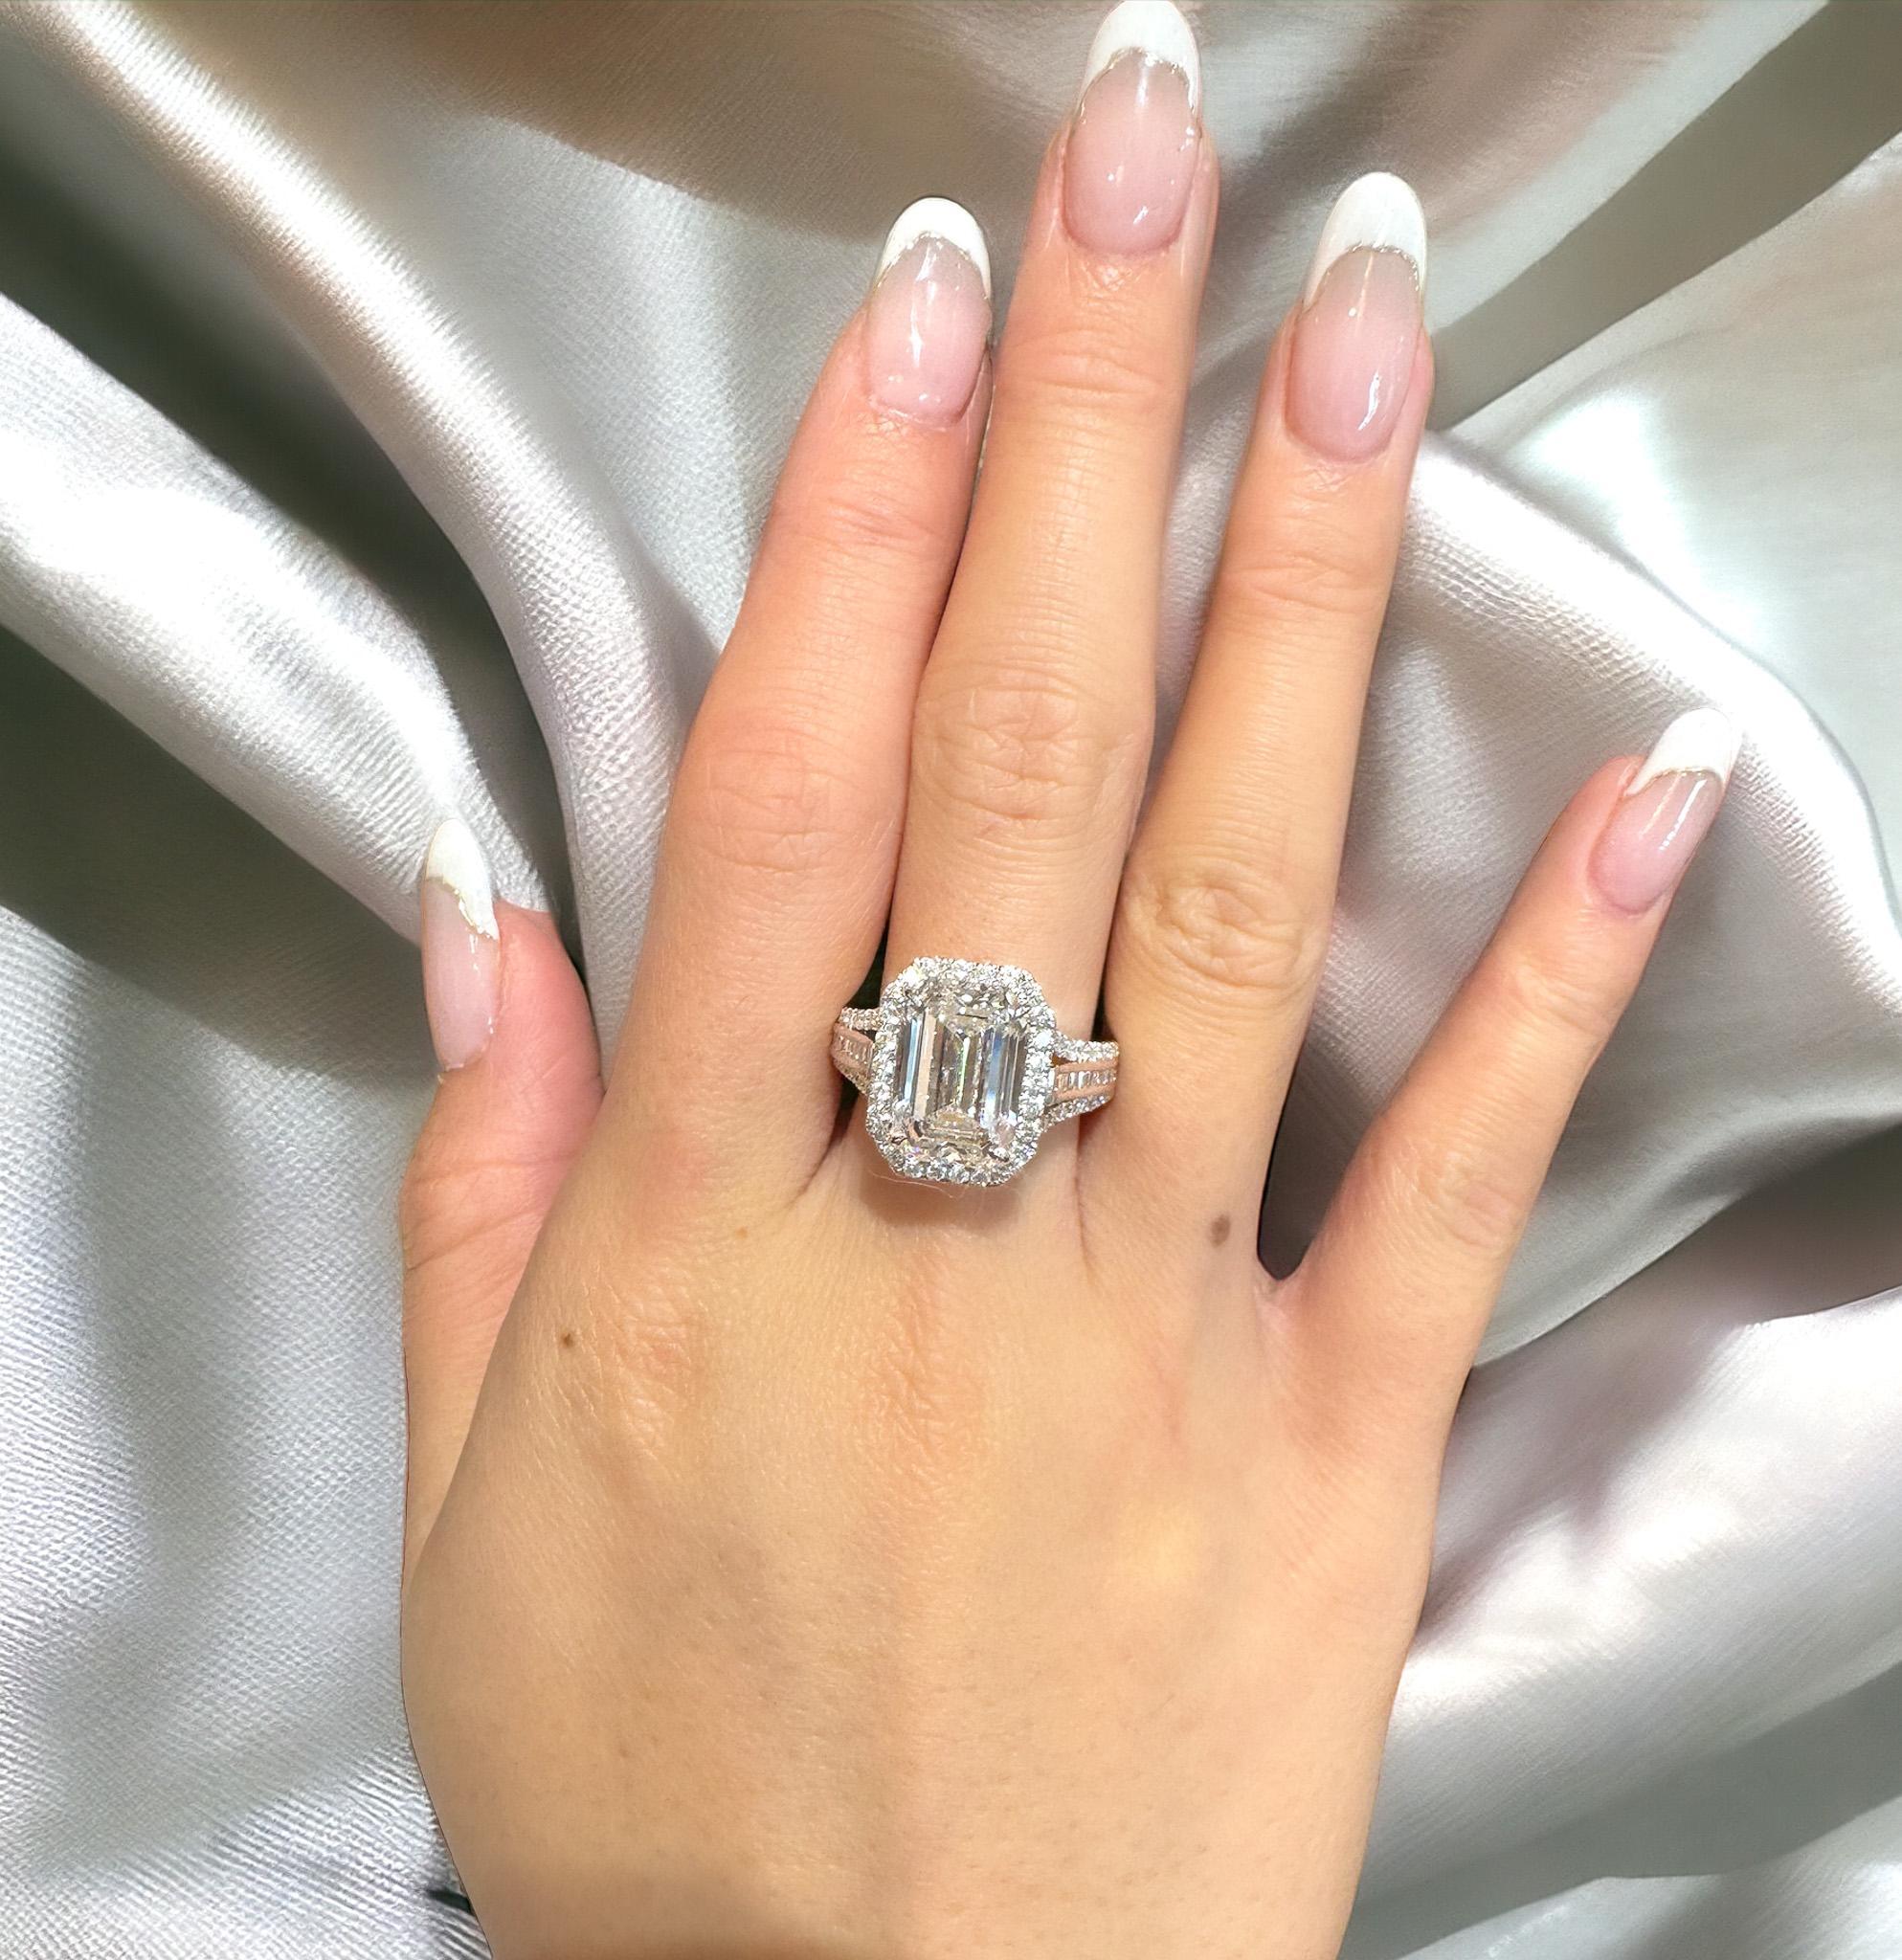 GIA Certified Natural 5.09 Carat Emerald Cut D/VVS2 Diamond and Round 0.90 CTTW Diamond Engagement Ring. The best color grade mother nature has to offer. A serious investment piece that transends most of the diamonds available today. 

Surrounded by